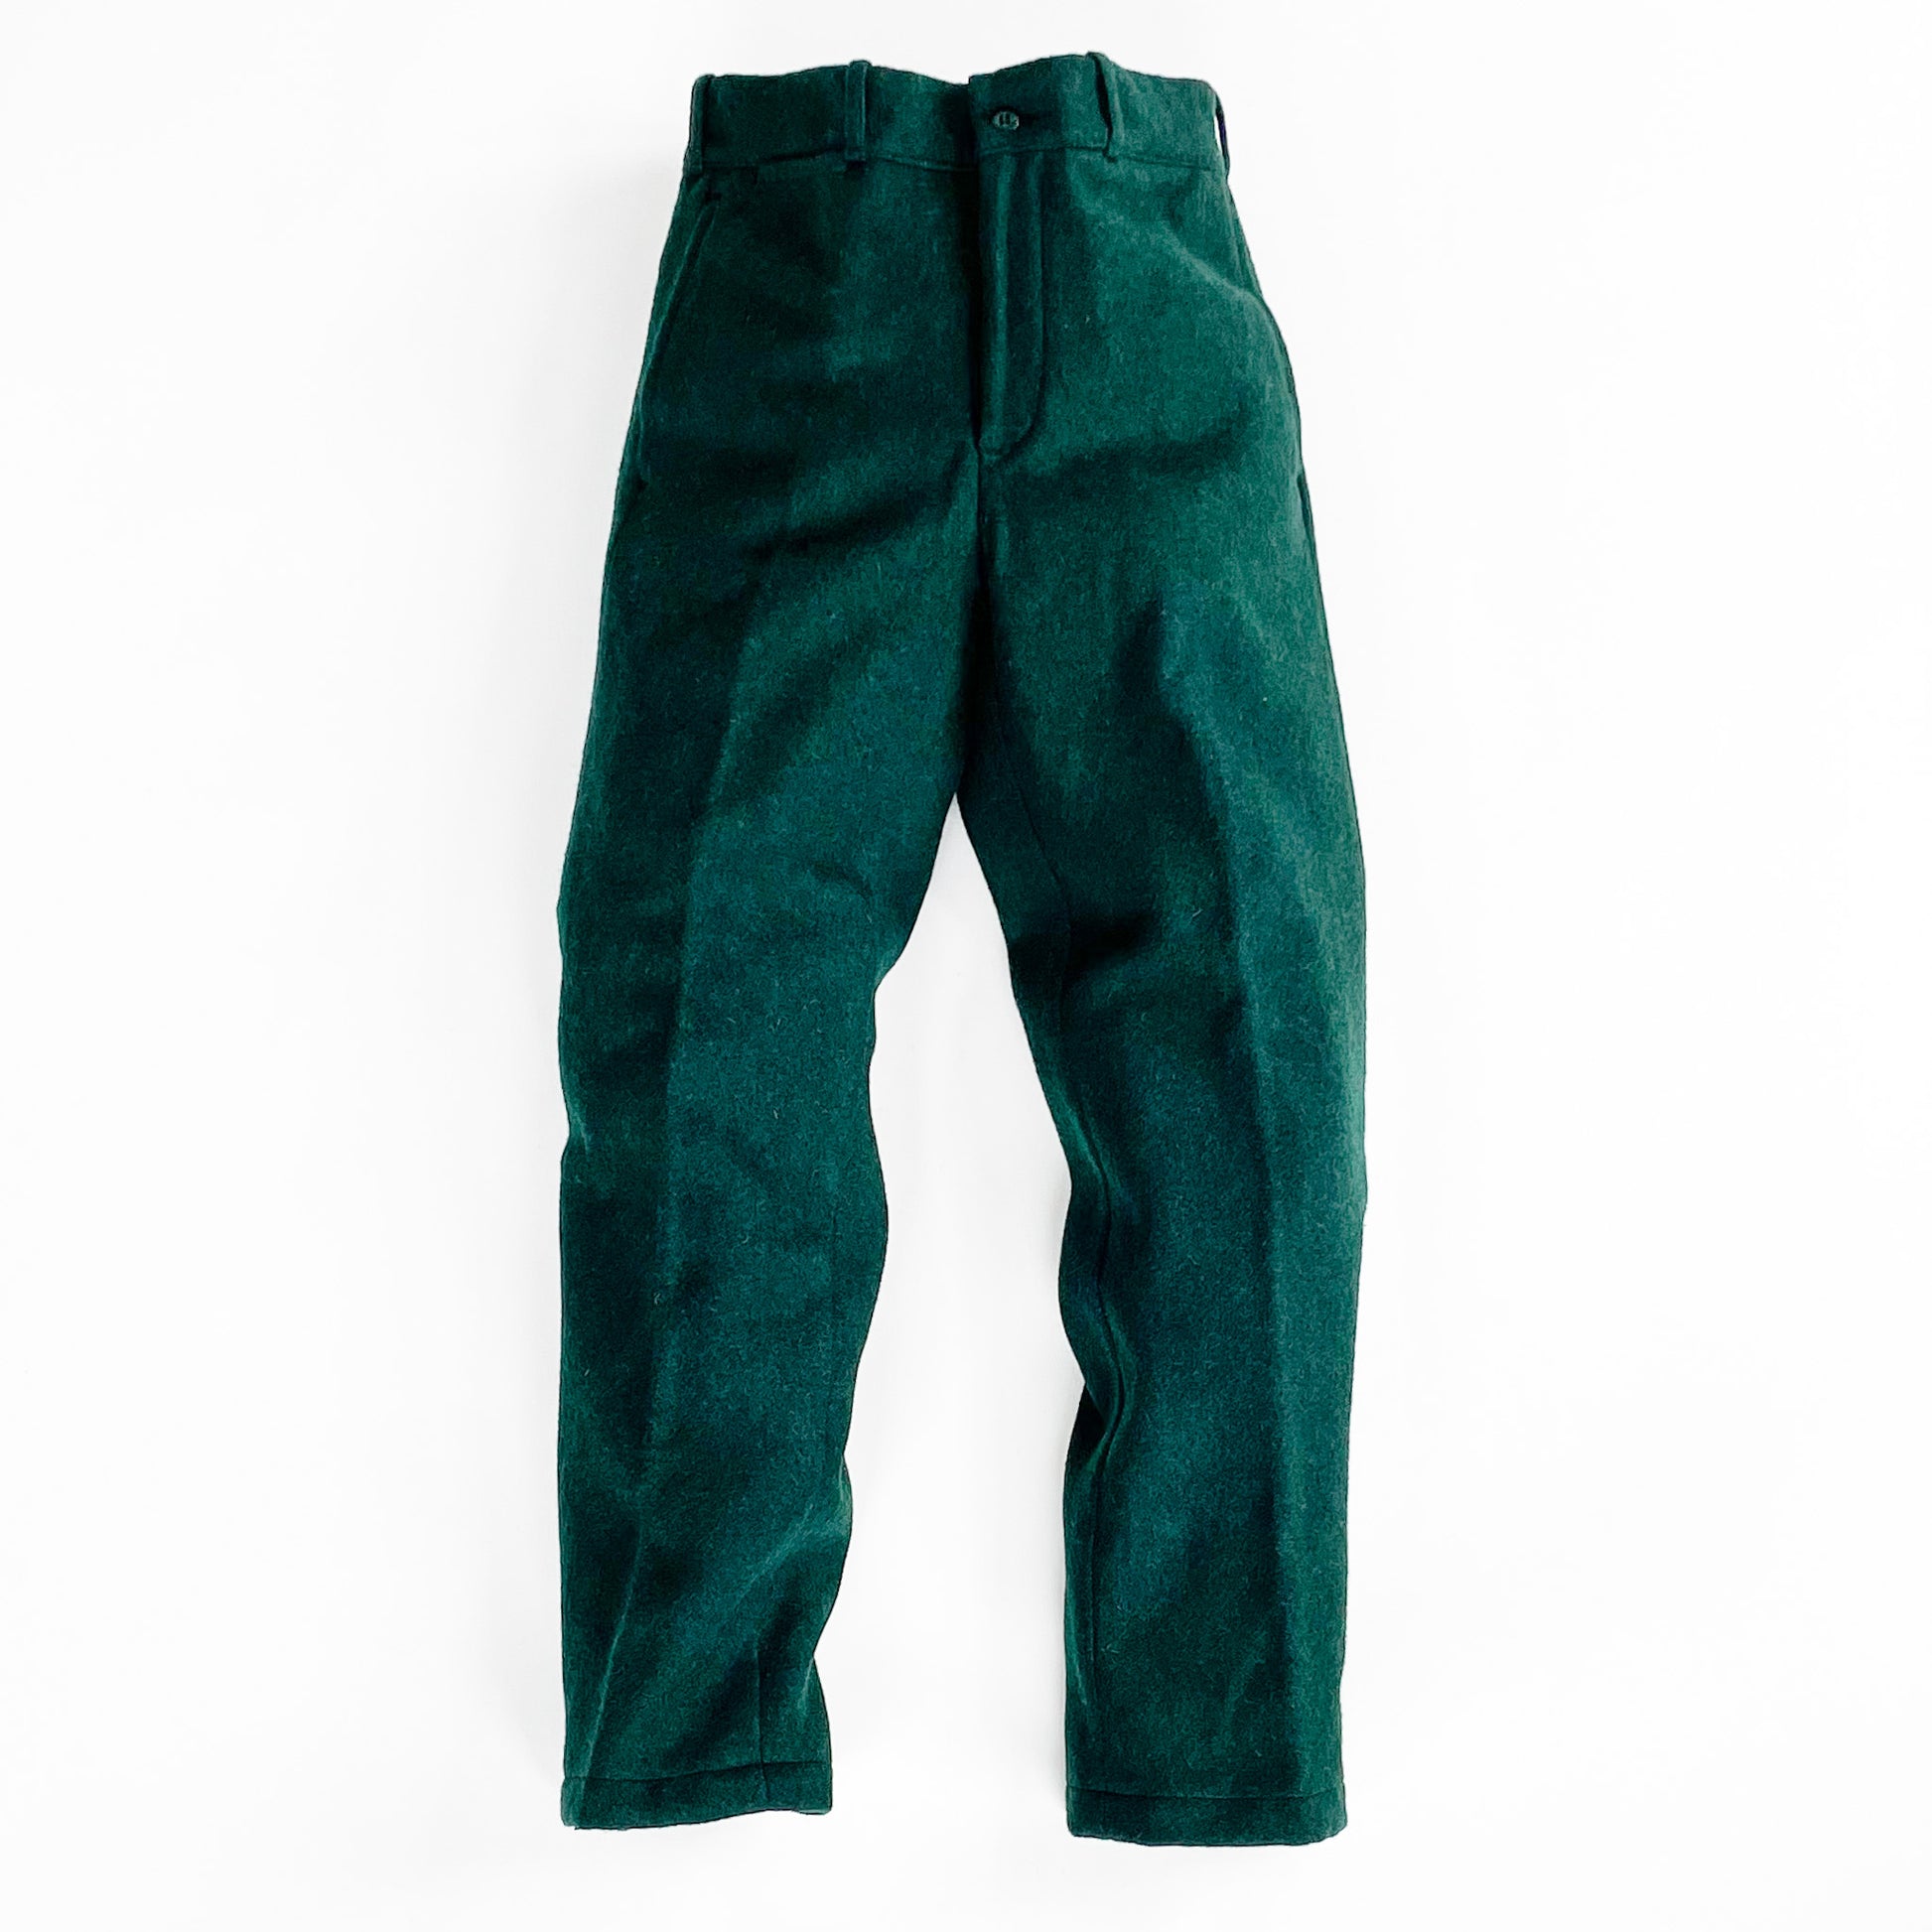 Zip Pants Spruce Green Microtherm Lined 15 inch side zipper on each leg front view showing both legs